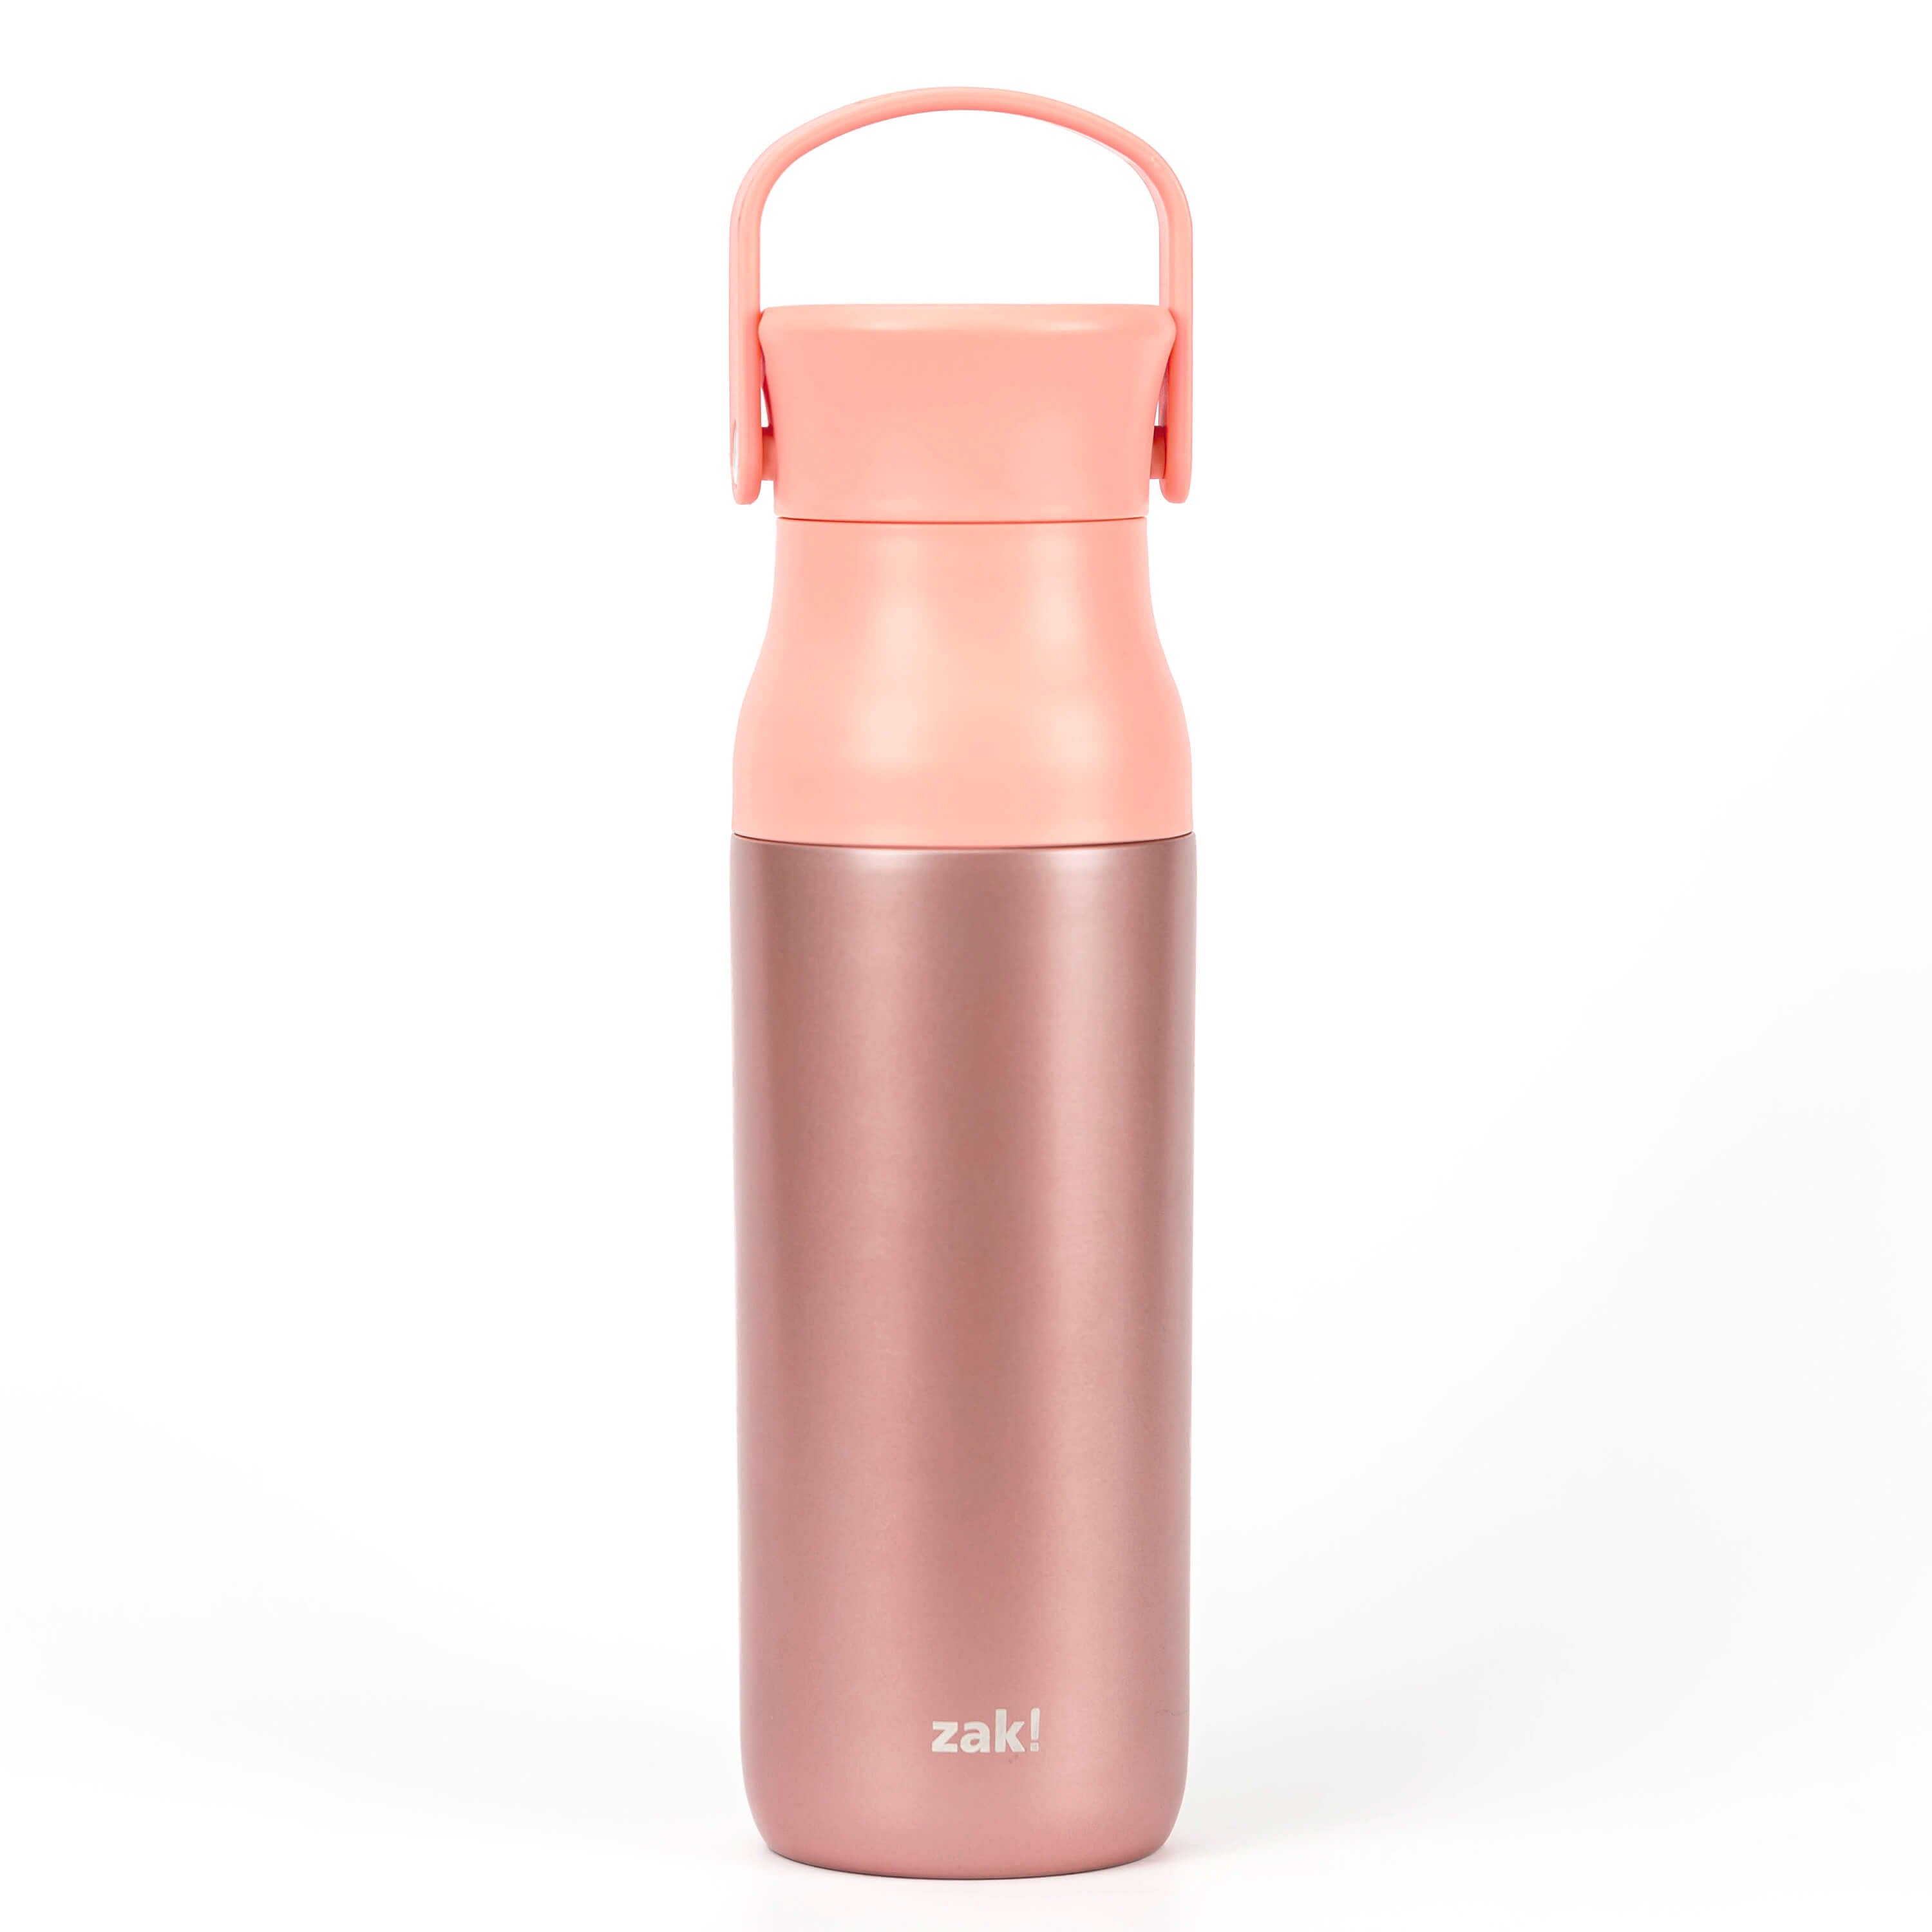 Harmony Recycled Stainless Steel Insulated Water Bottle with Large Chug Lid - Coral, 32 ounces